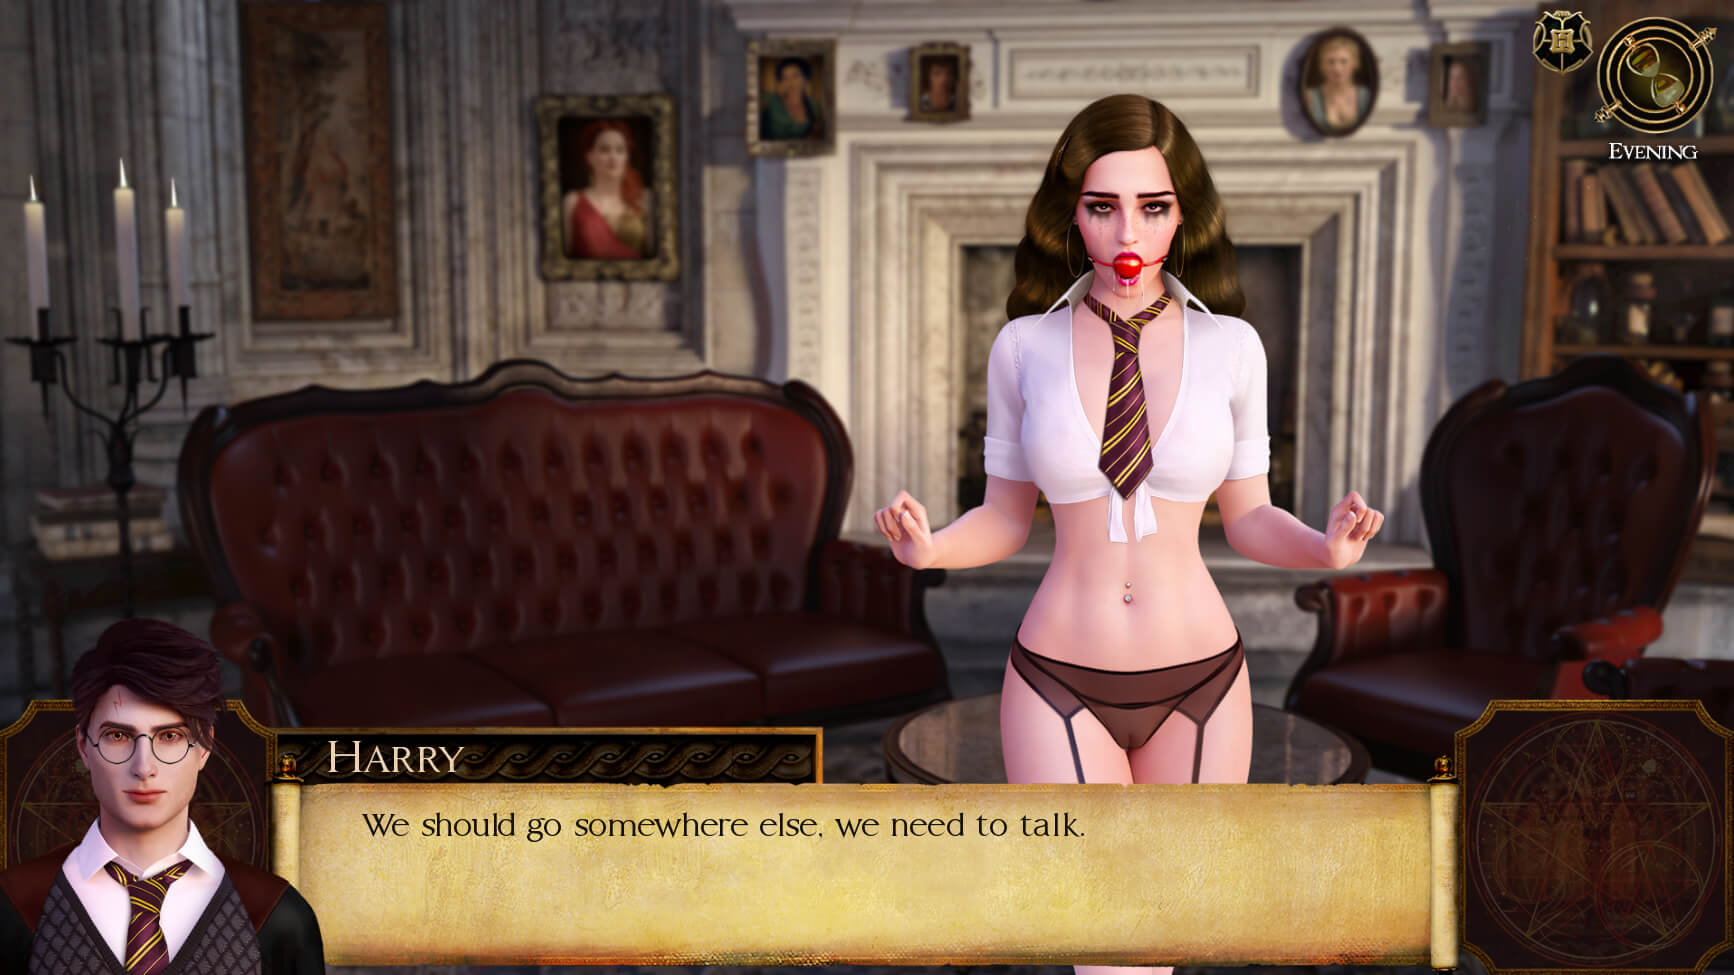 Download adult game With Hermione - Version 0.3.1 Alpha by Kirill Repin Art  for free.